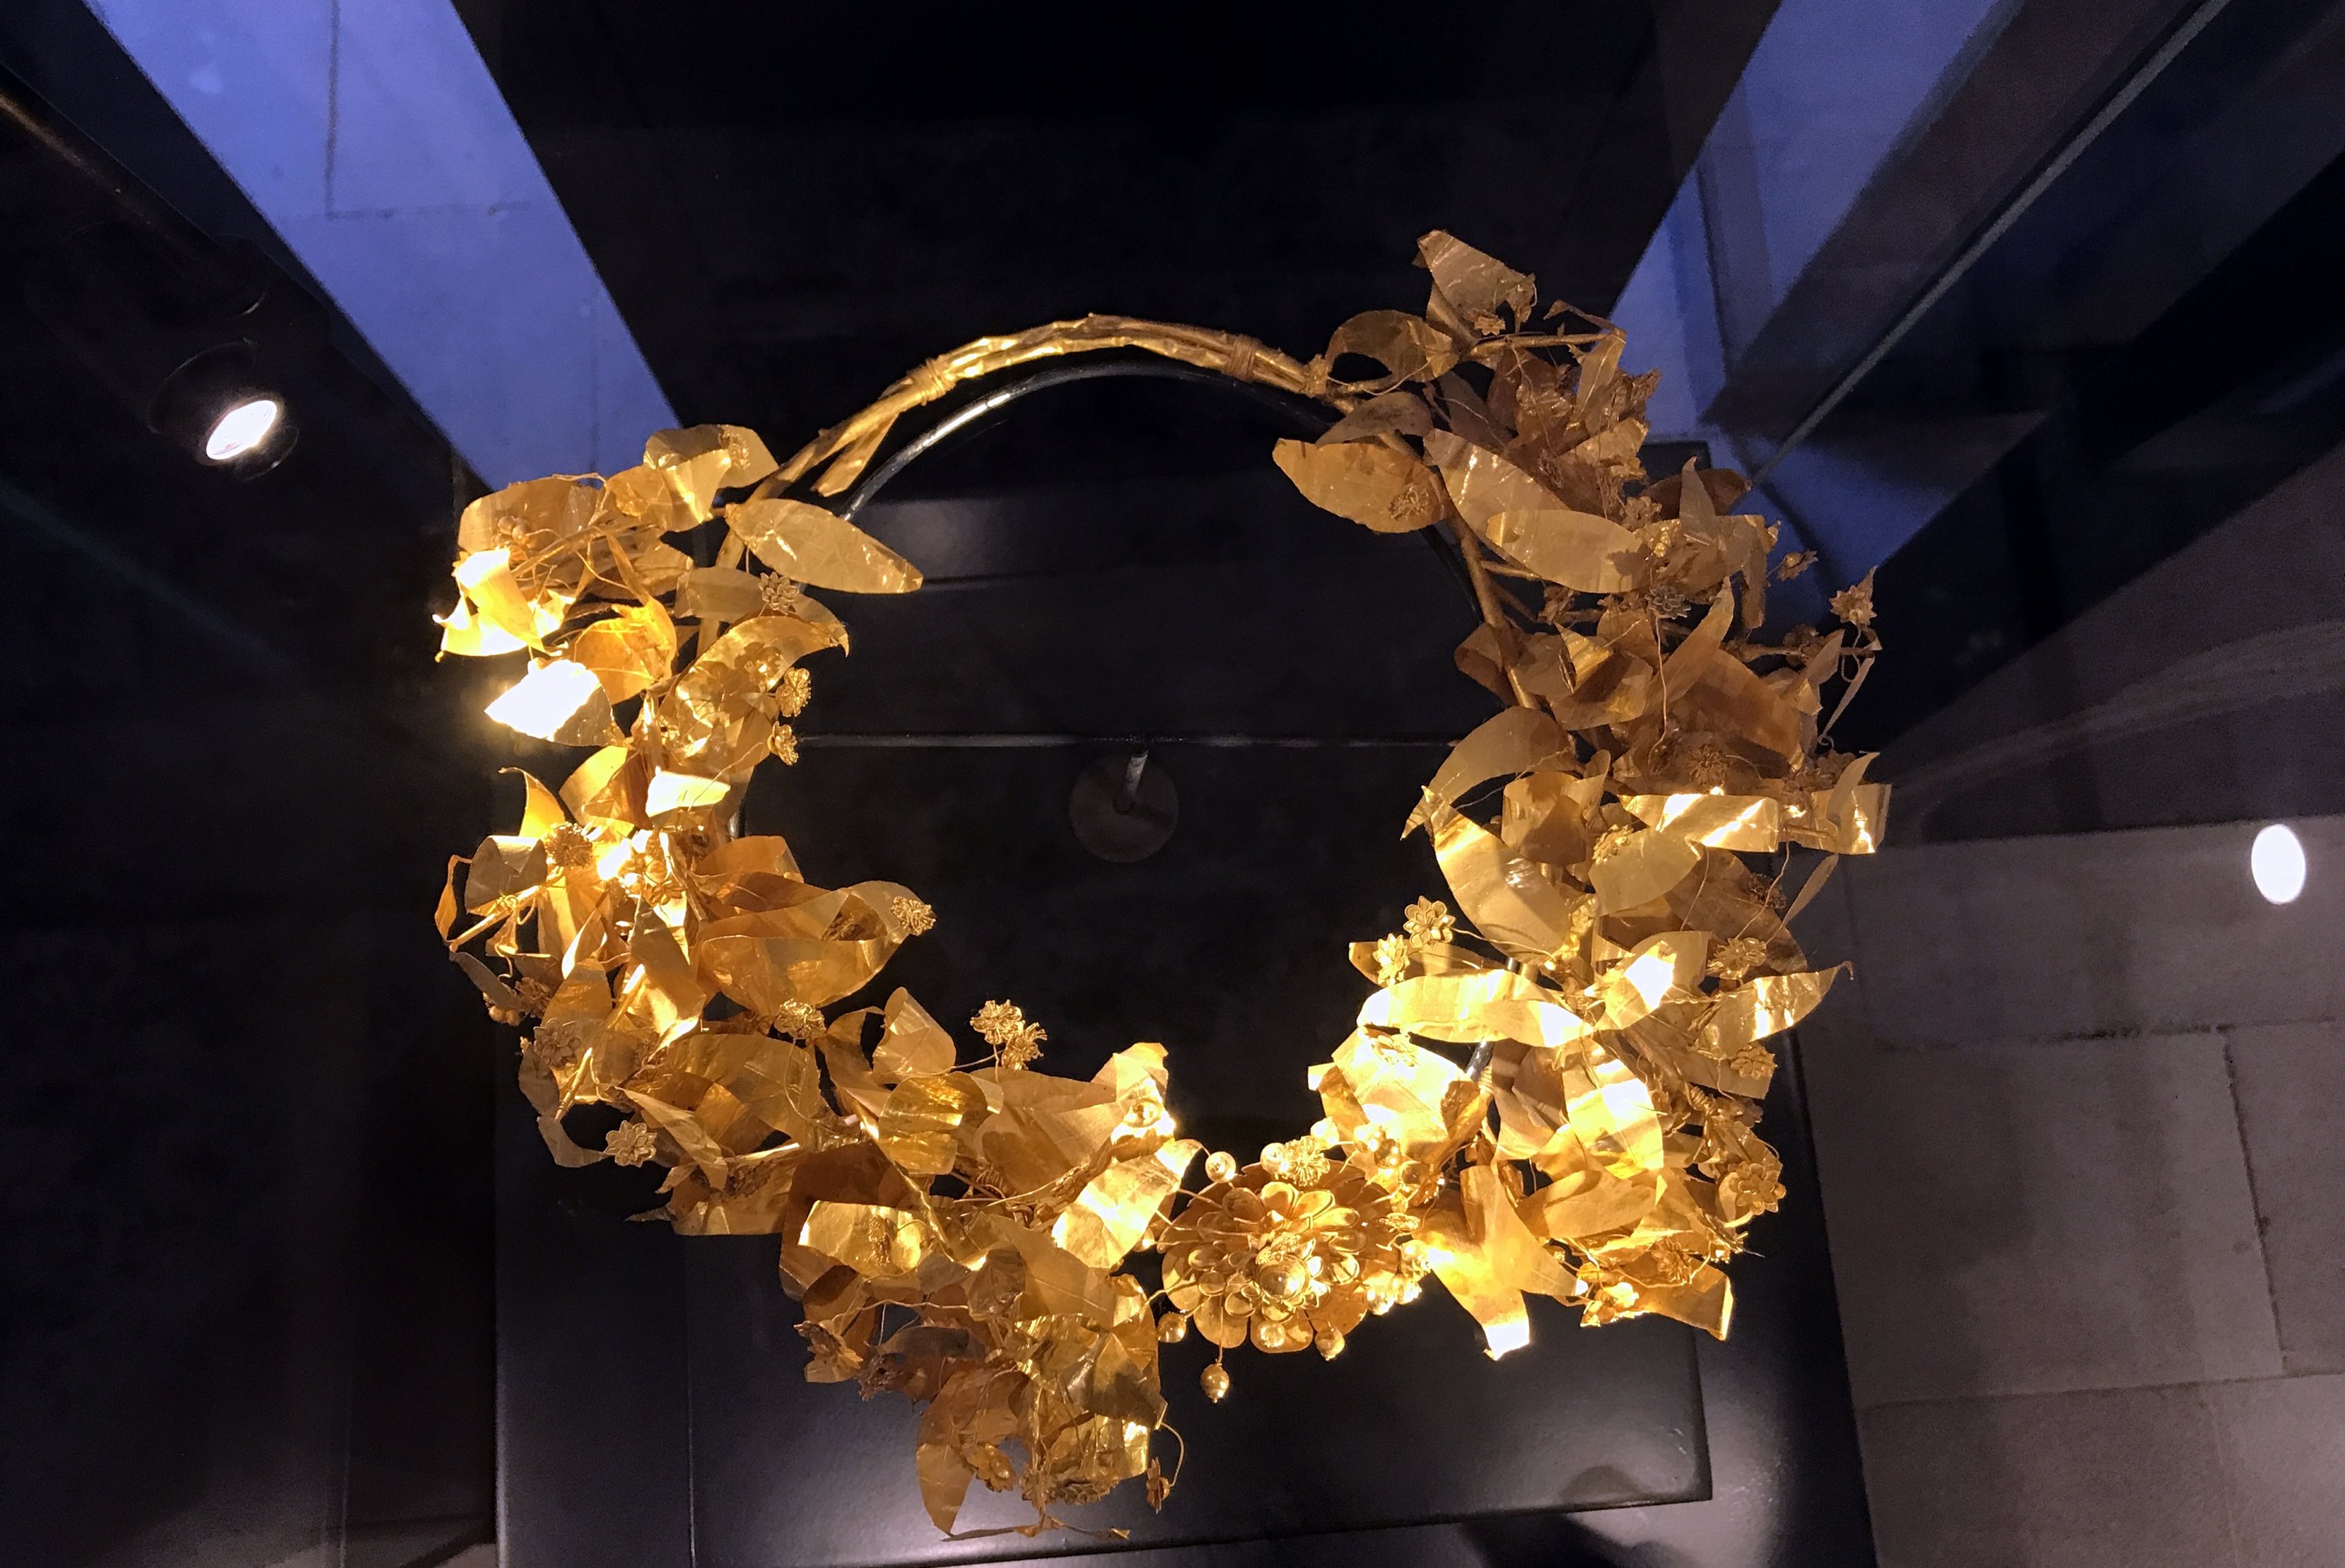 The golden crown found inside the "Carian Princess" sarcophagus.